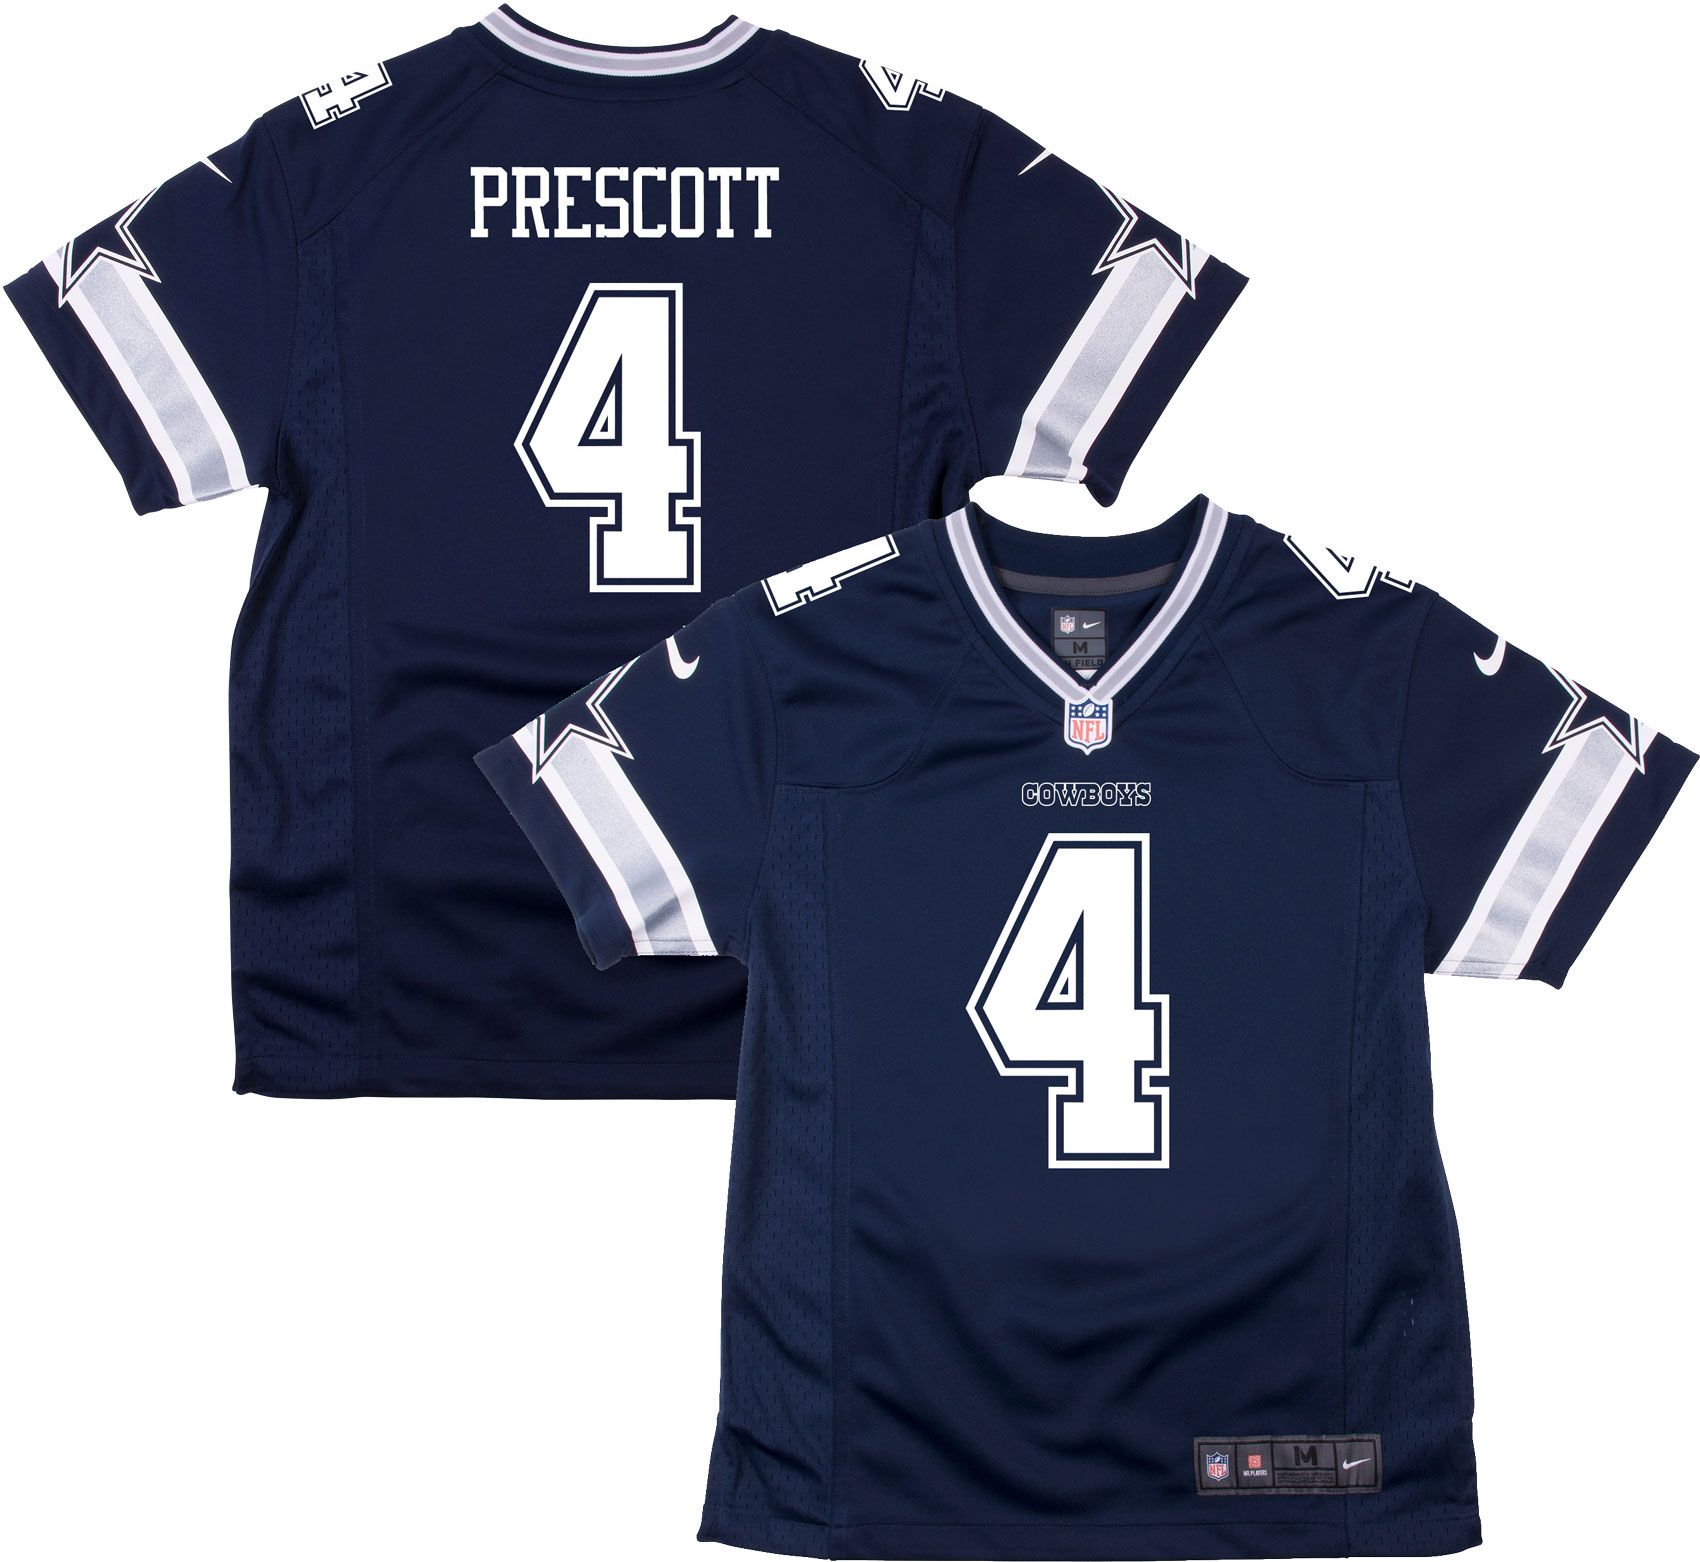 Number 4 Cowboys Jersey Italy, SAVE 49% 